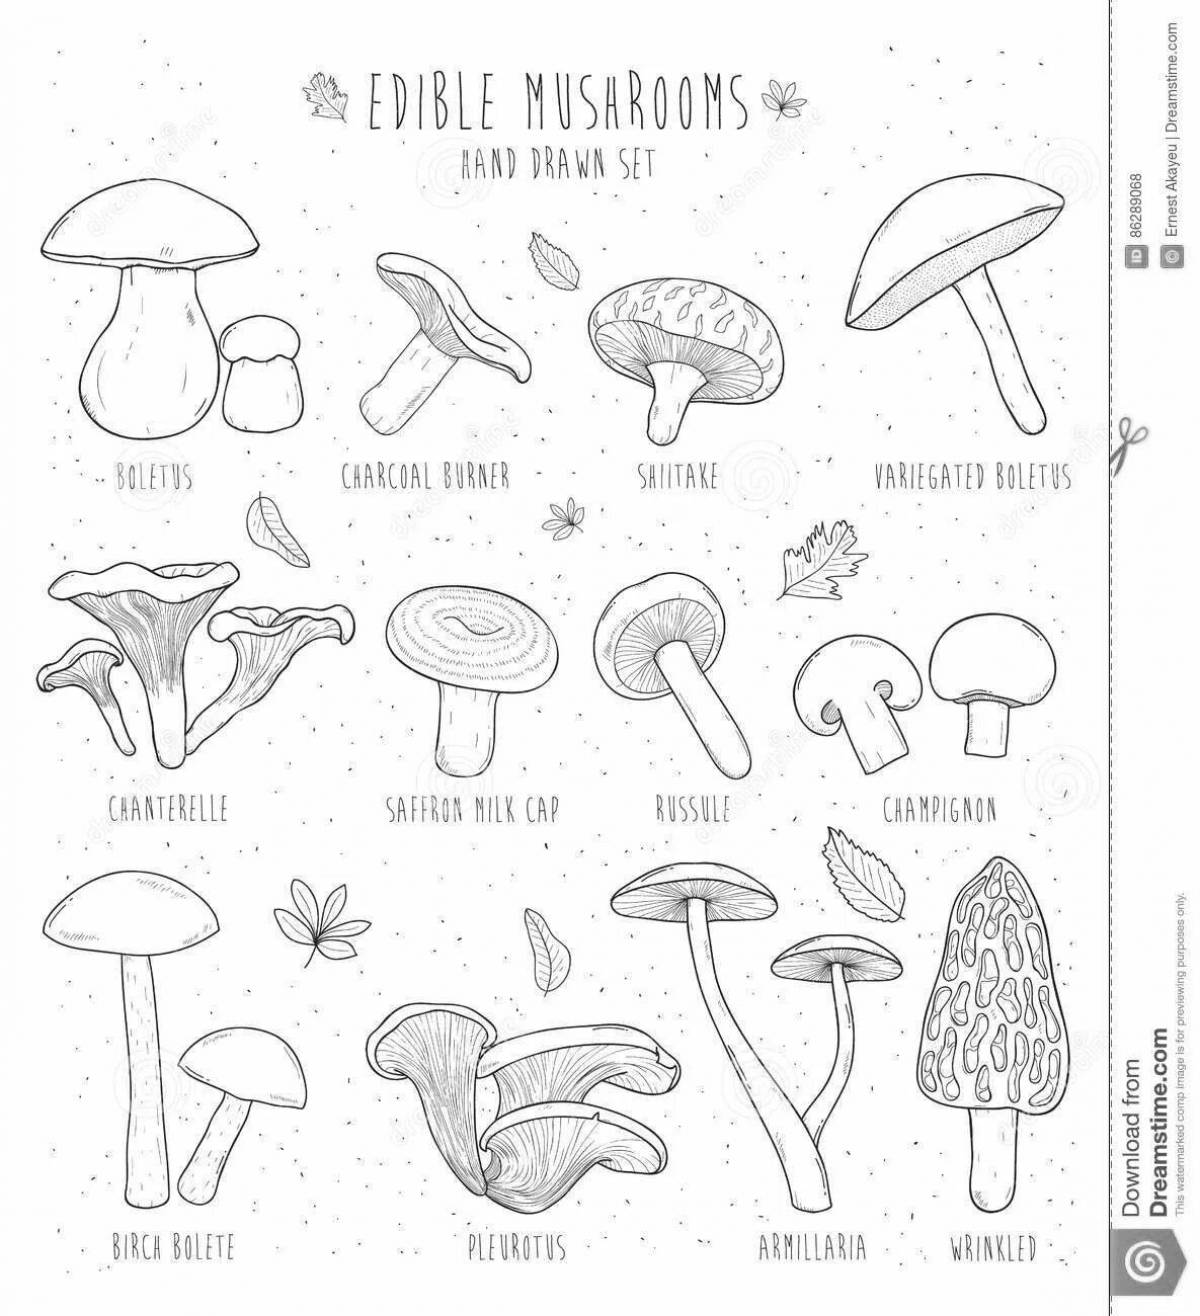 Colouring awesome poisonous mushrooms